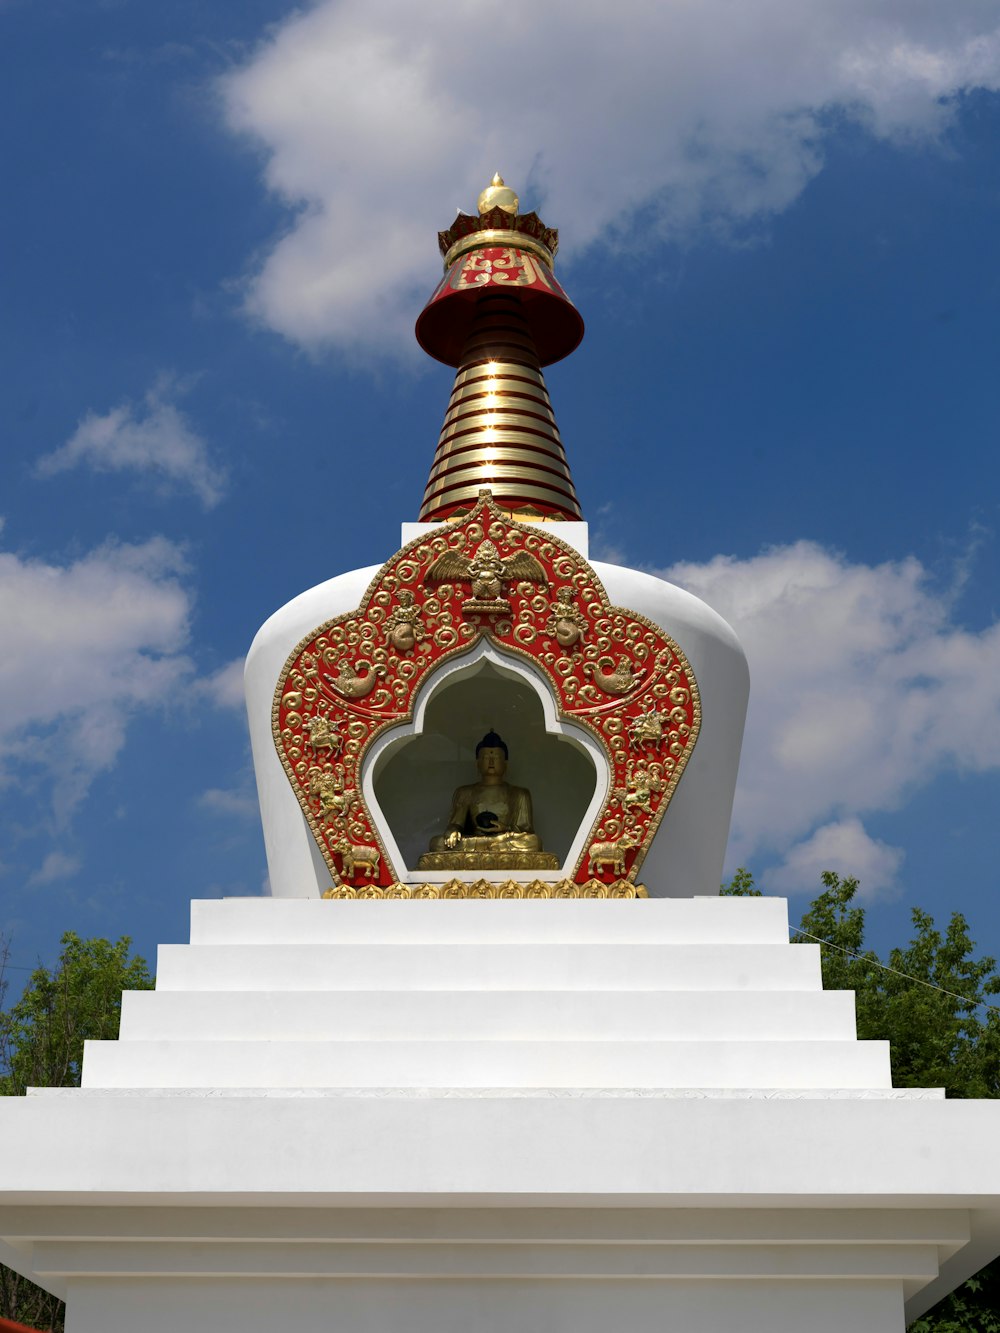 a golden and red statue on top of a white structure